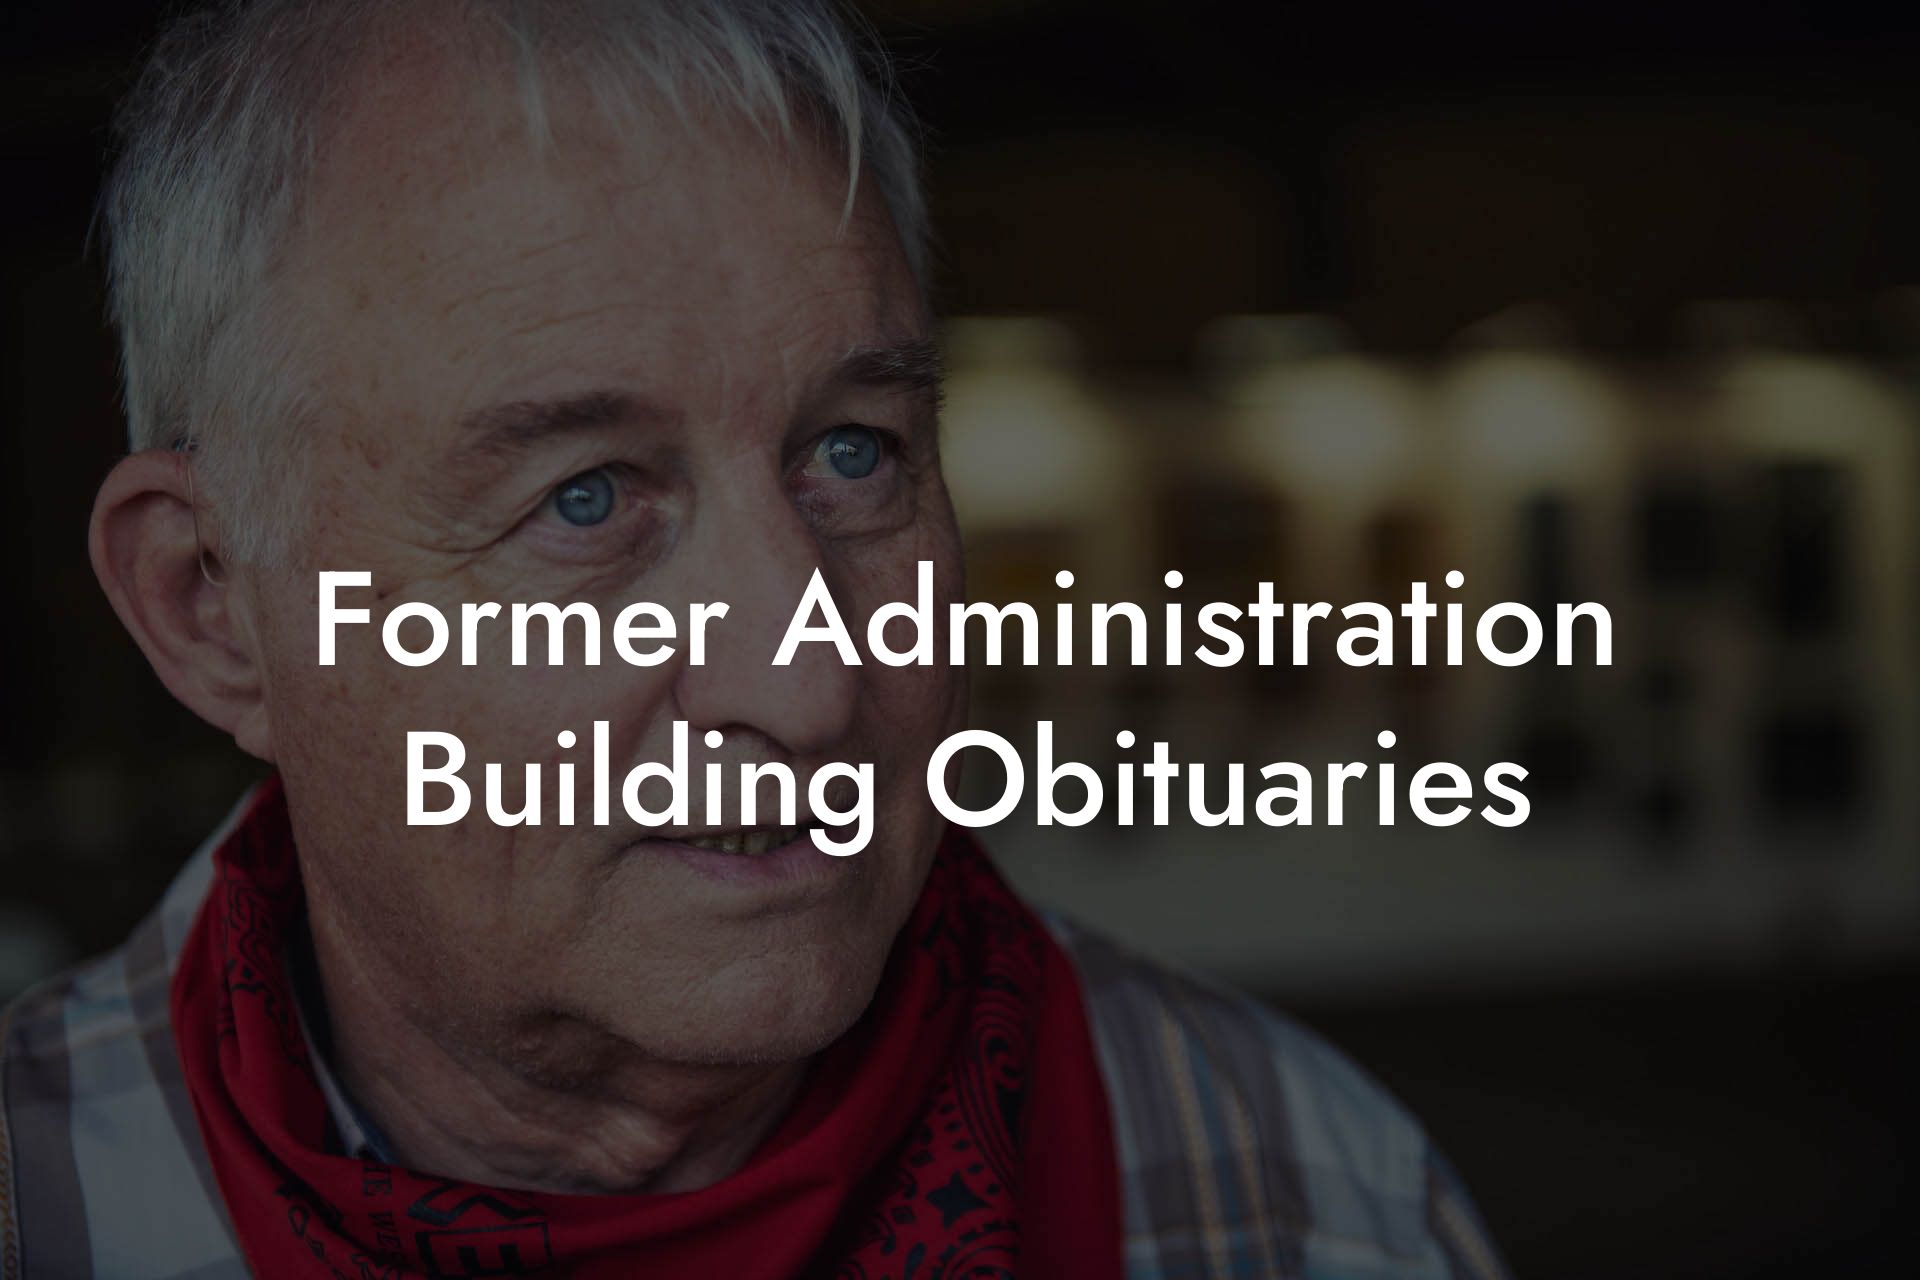 Former Administration Building Obituaries